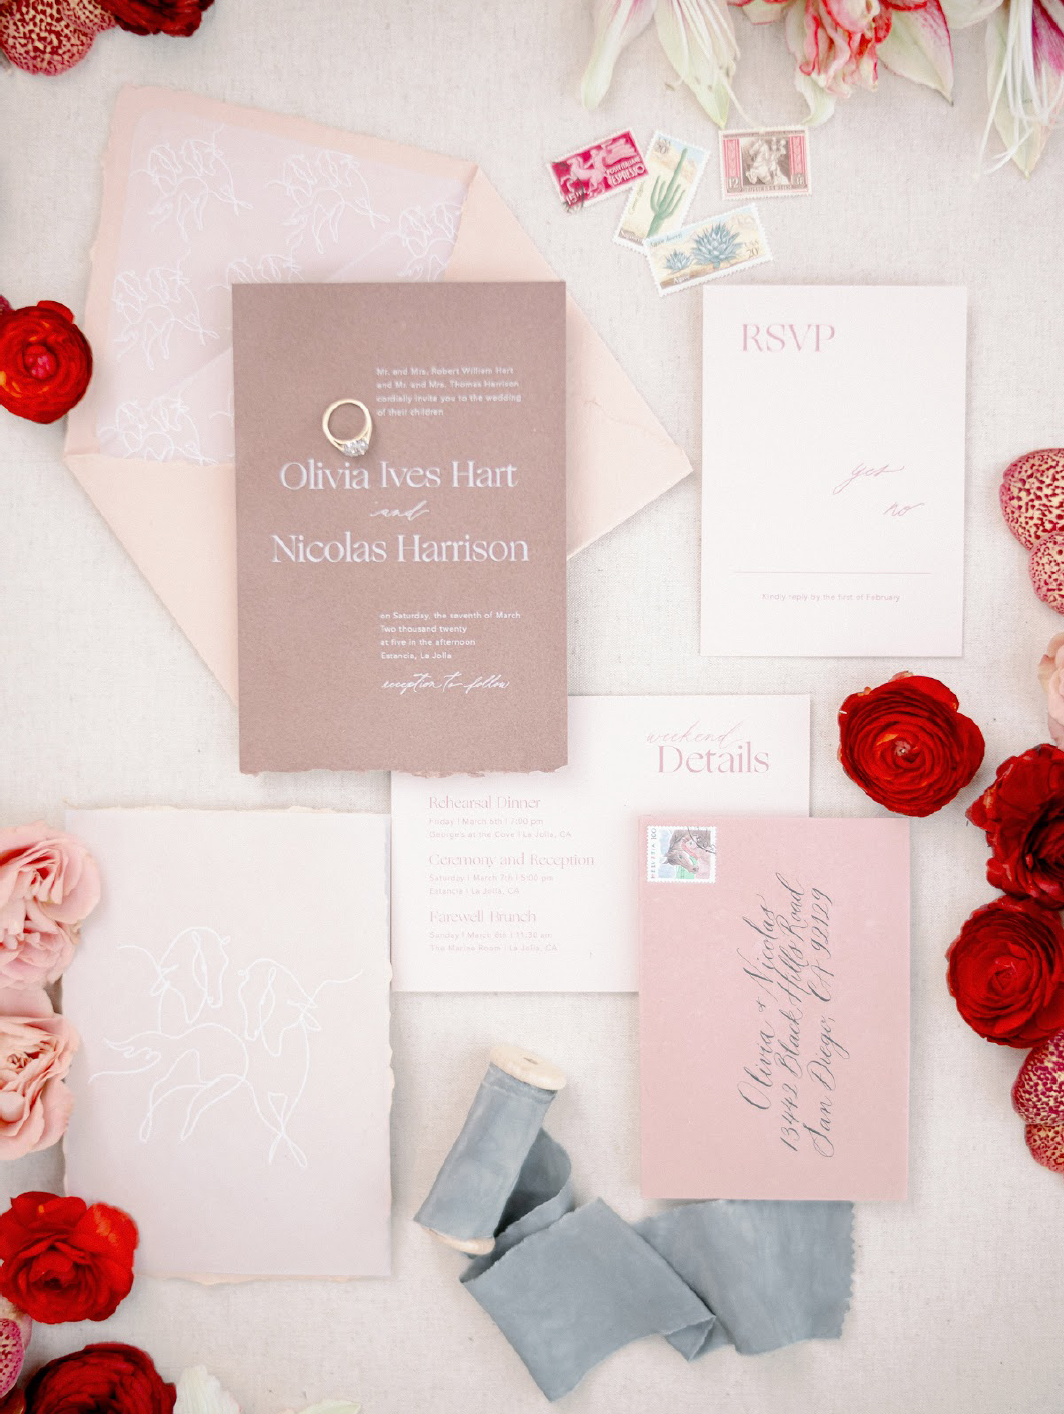 Modern romantic wedding invitations by Dominique Alba with layered pink colors and a hand illustrated art card, captured by Paul Von Rieter and planned by Stylish Details Events